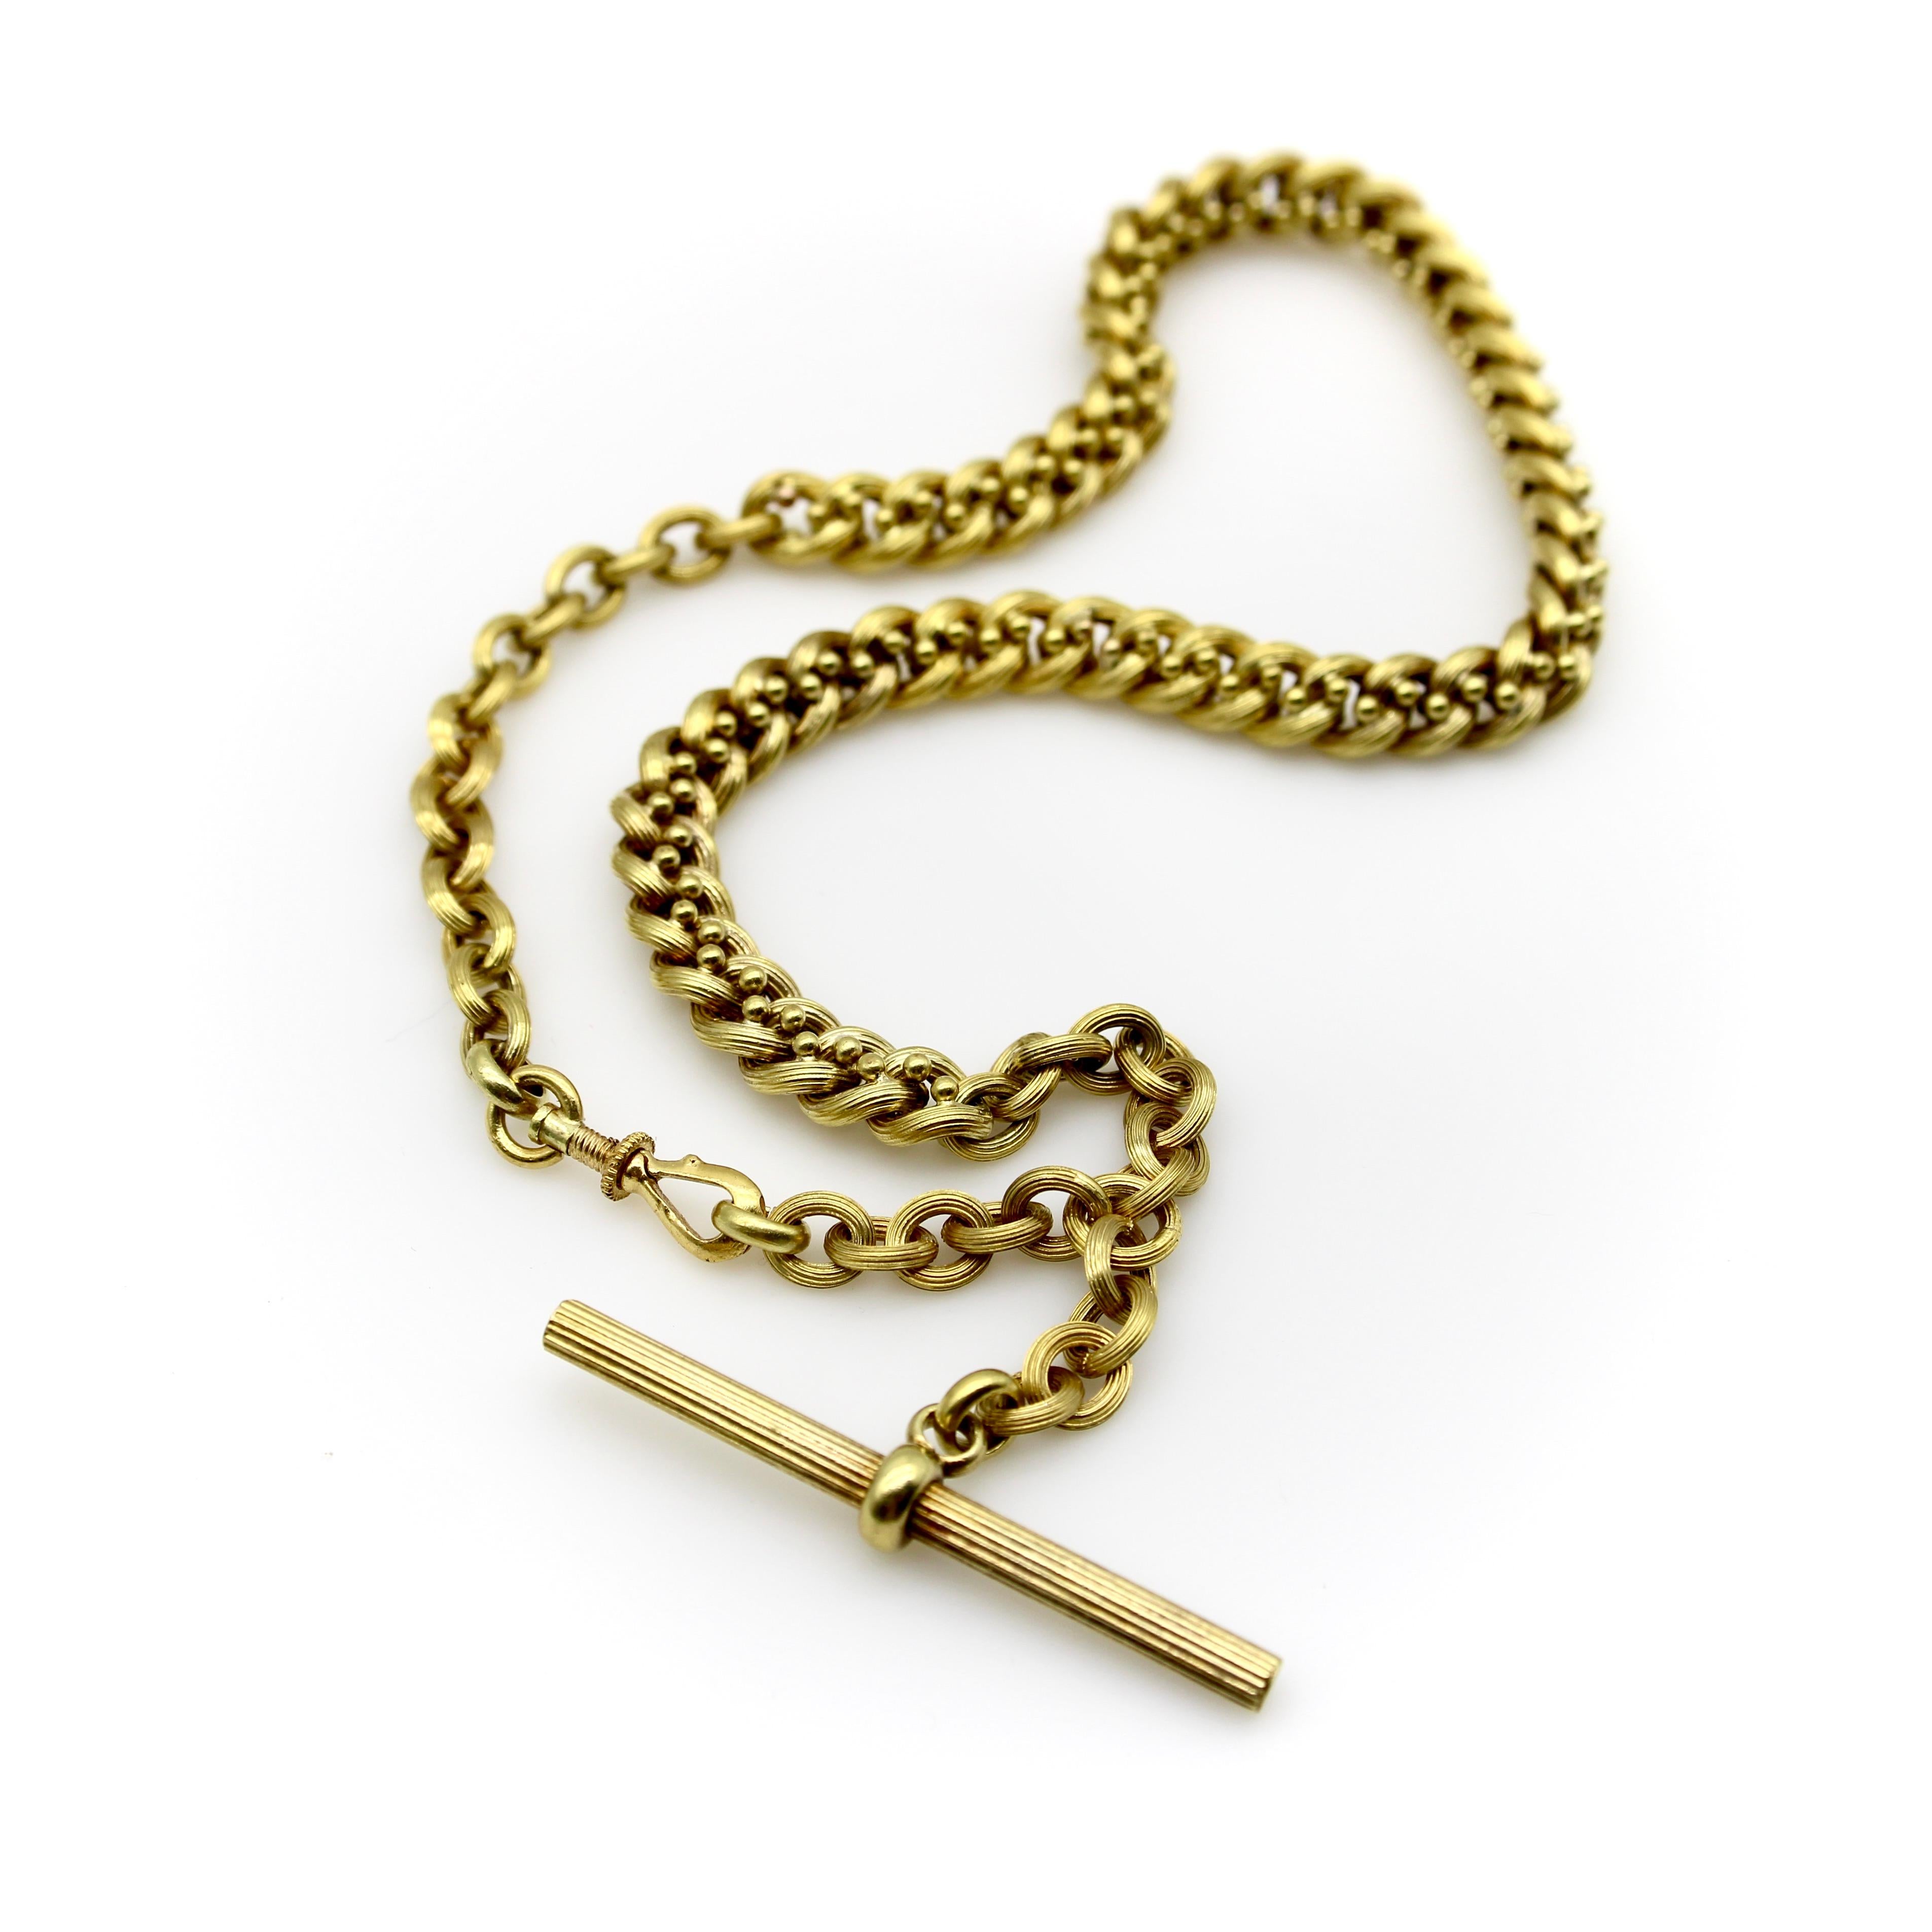 This 14k gold watch chain has a fabulous hollow link interwoven with tiny balls for an unusual variation of a curb link. The links are carved with a ribbed texture that give a matte surface to the gold. This creates a unique visual texture that